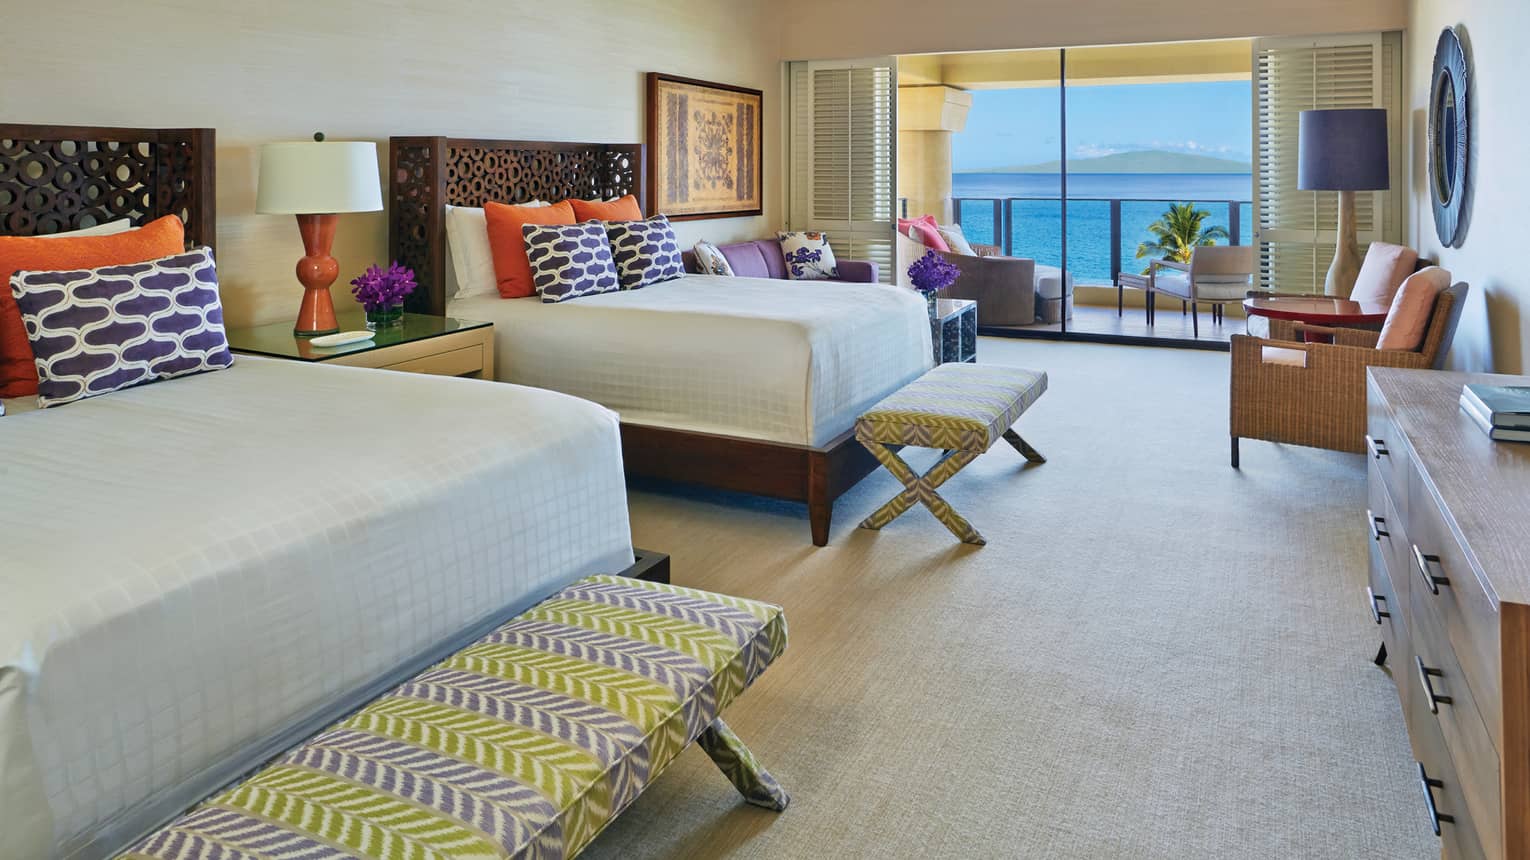 Maile Suite double bedroom with view onto the ocean and colourful bedding